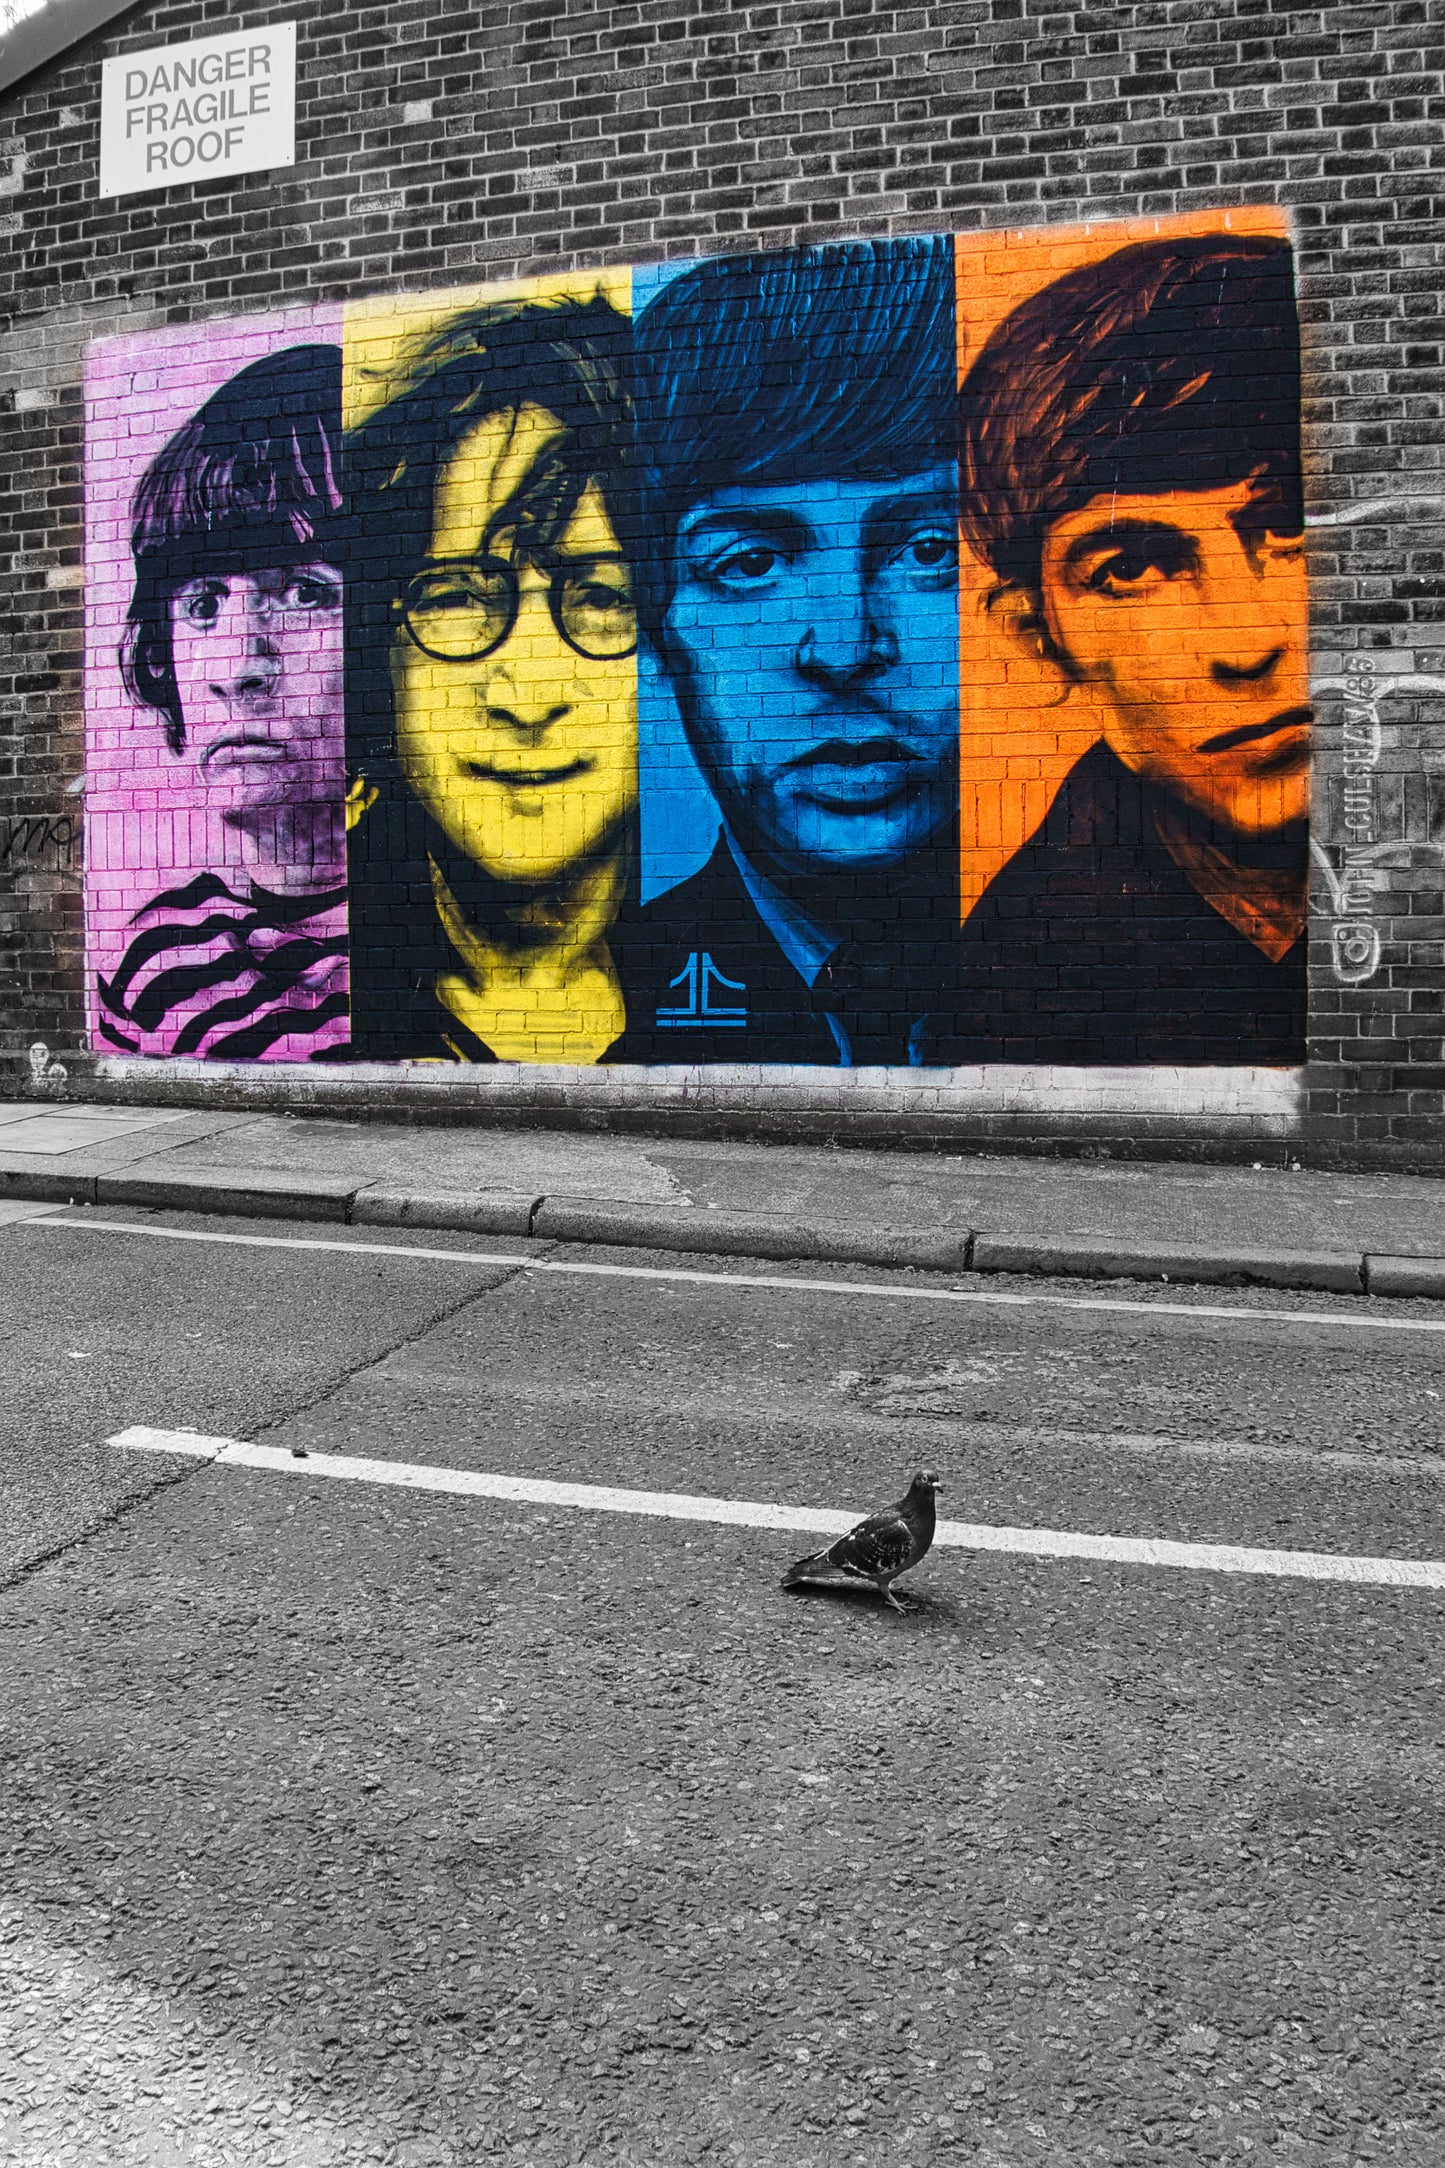 Liverpool Baltic Triangle Photo and Images -Liverpool Graffiti - Beatles and the Bird - PTI07281 - Photo by Photographer Martin Fisher - Picture The Image